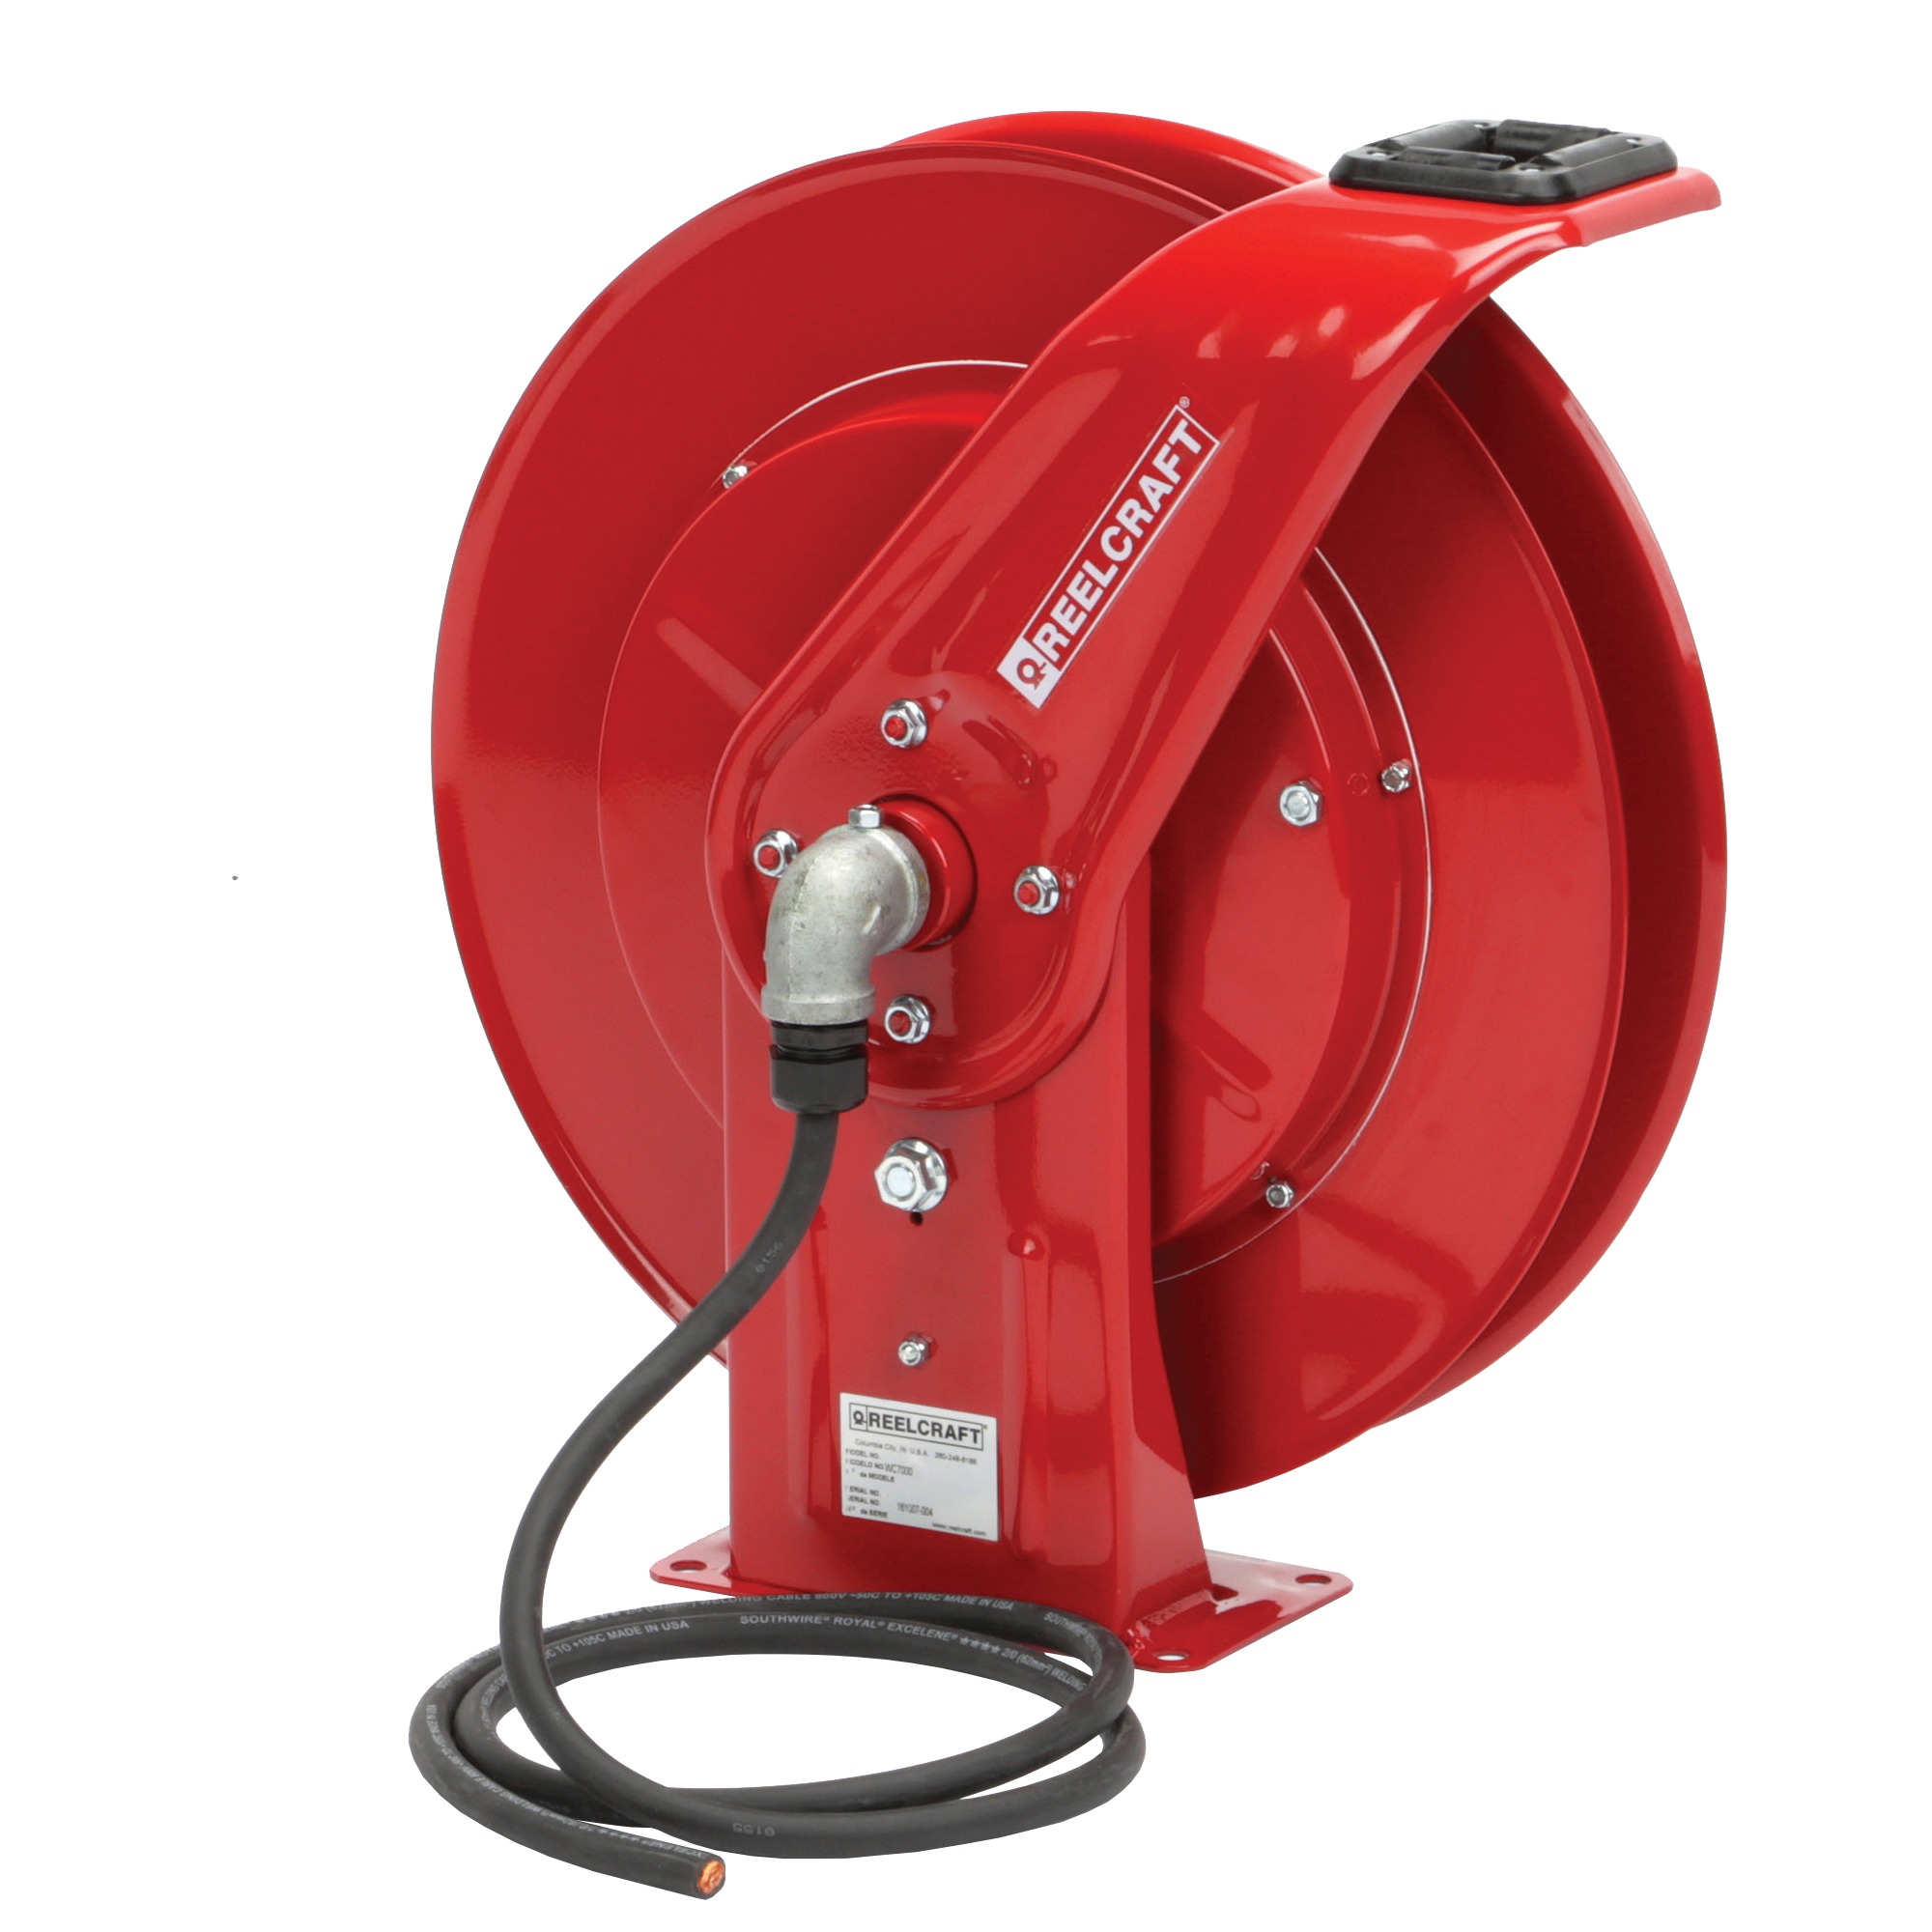 WCH7000 - Premium Duty 700 Amp Cable Welding Reel - Hose, Cord and